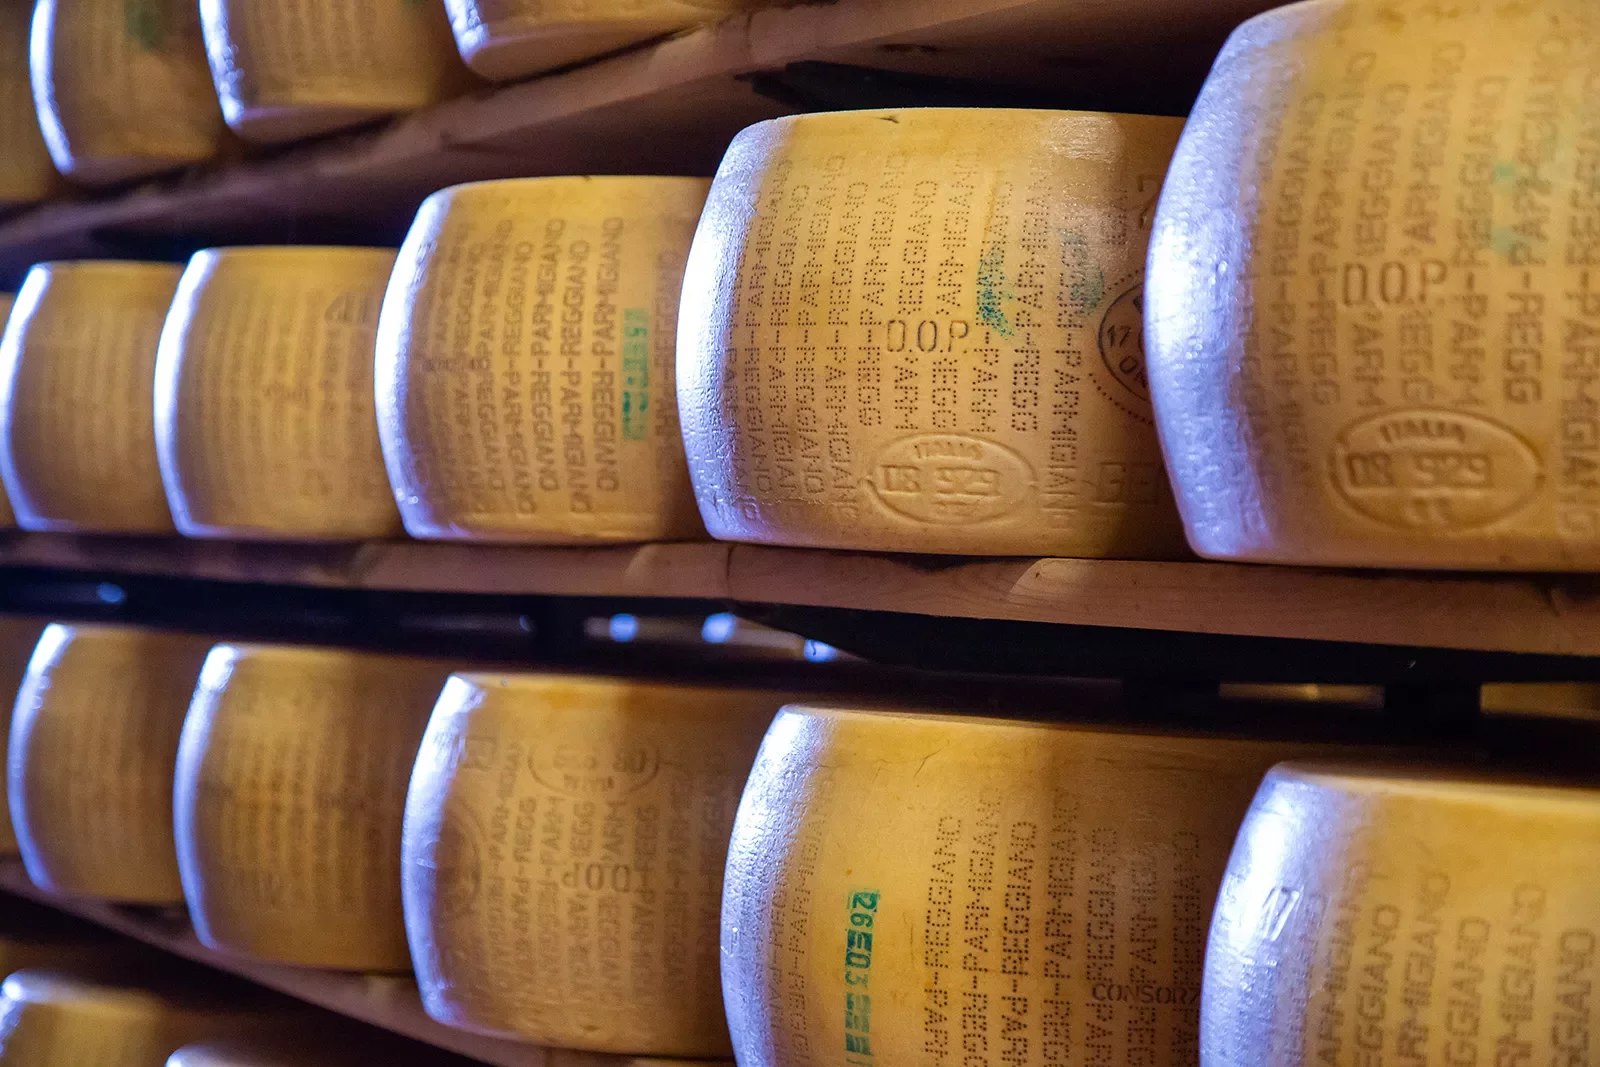 Shelves filled with wheels of Parmigiano Regiano